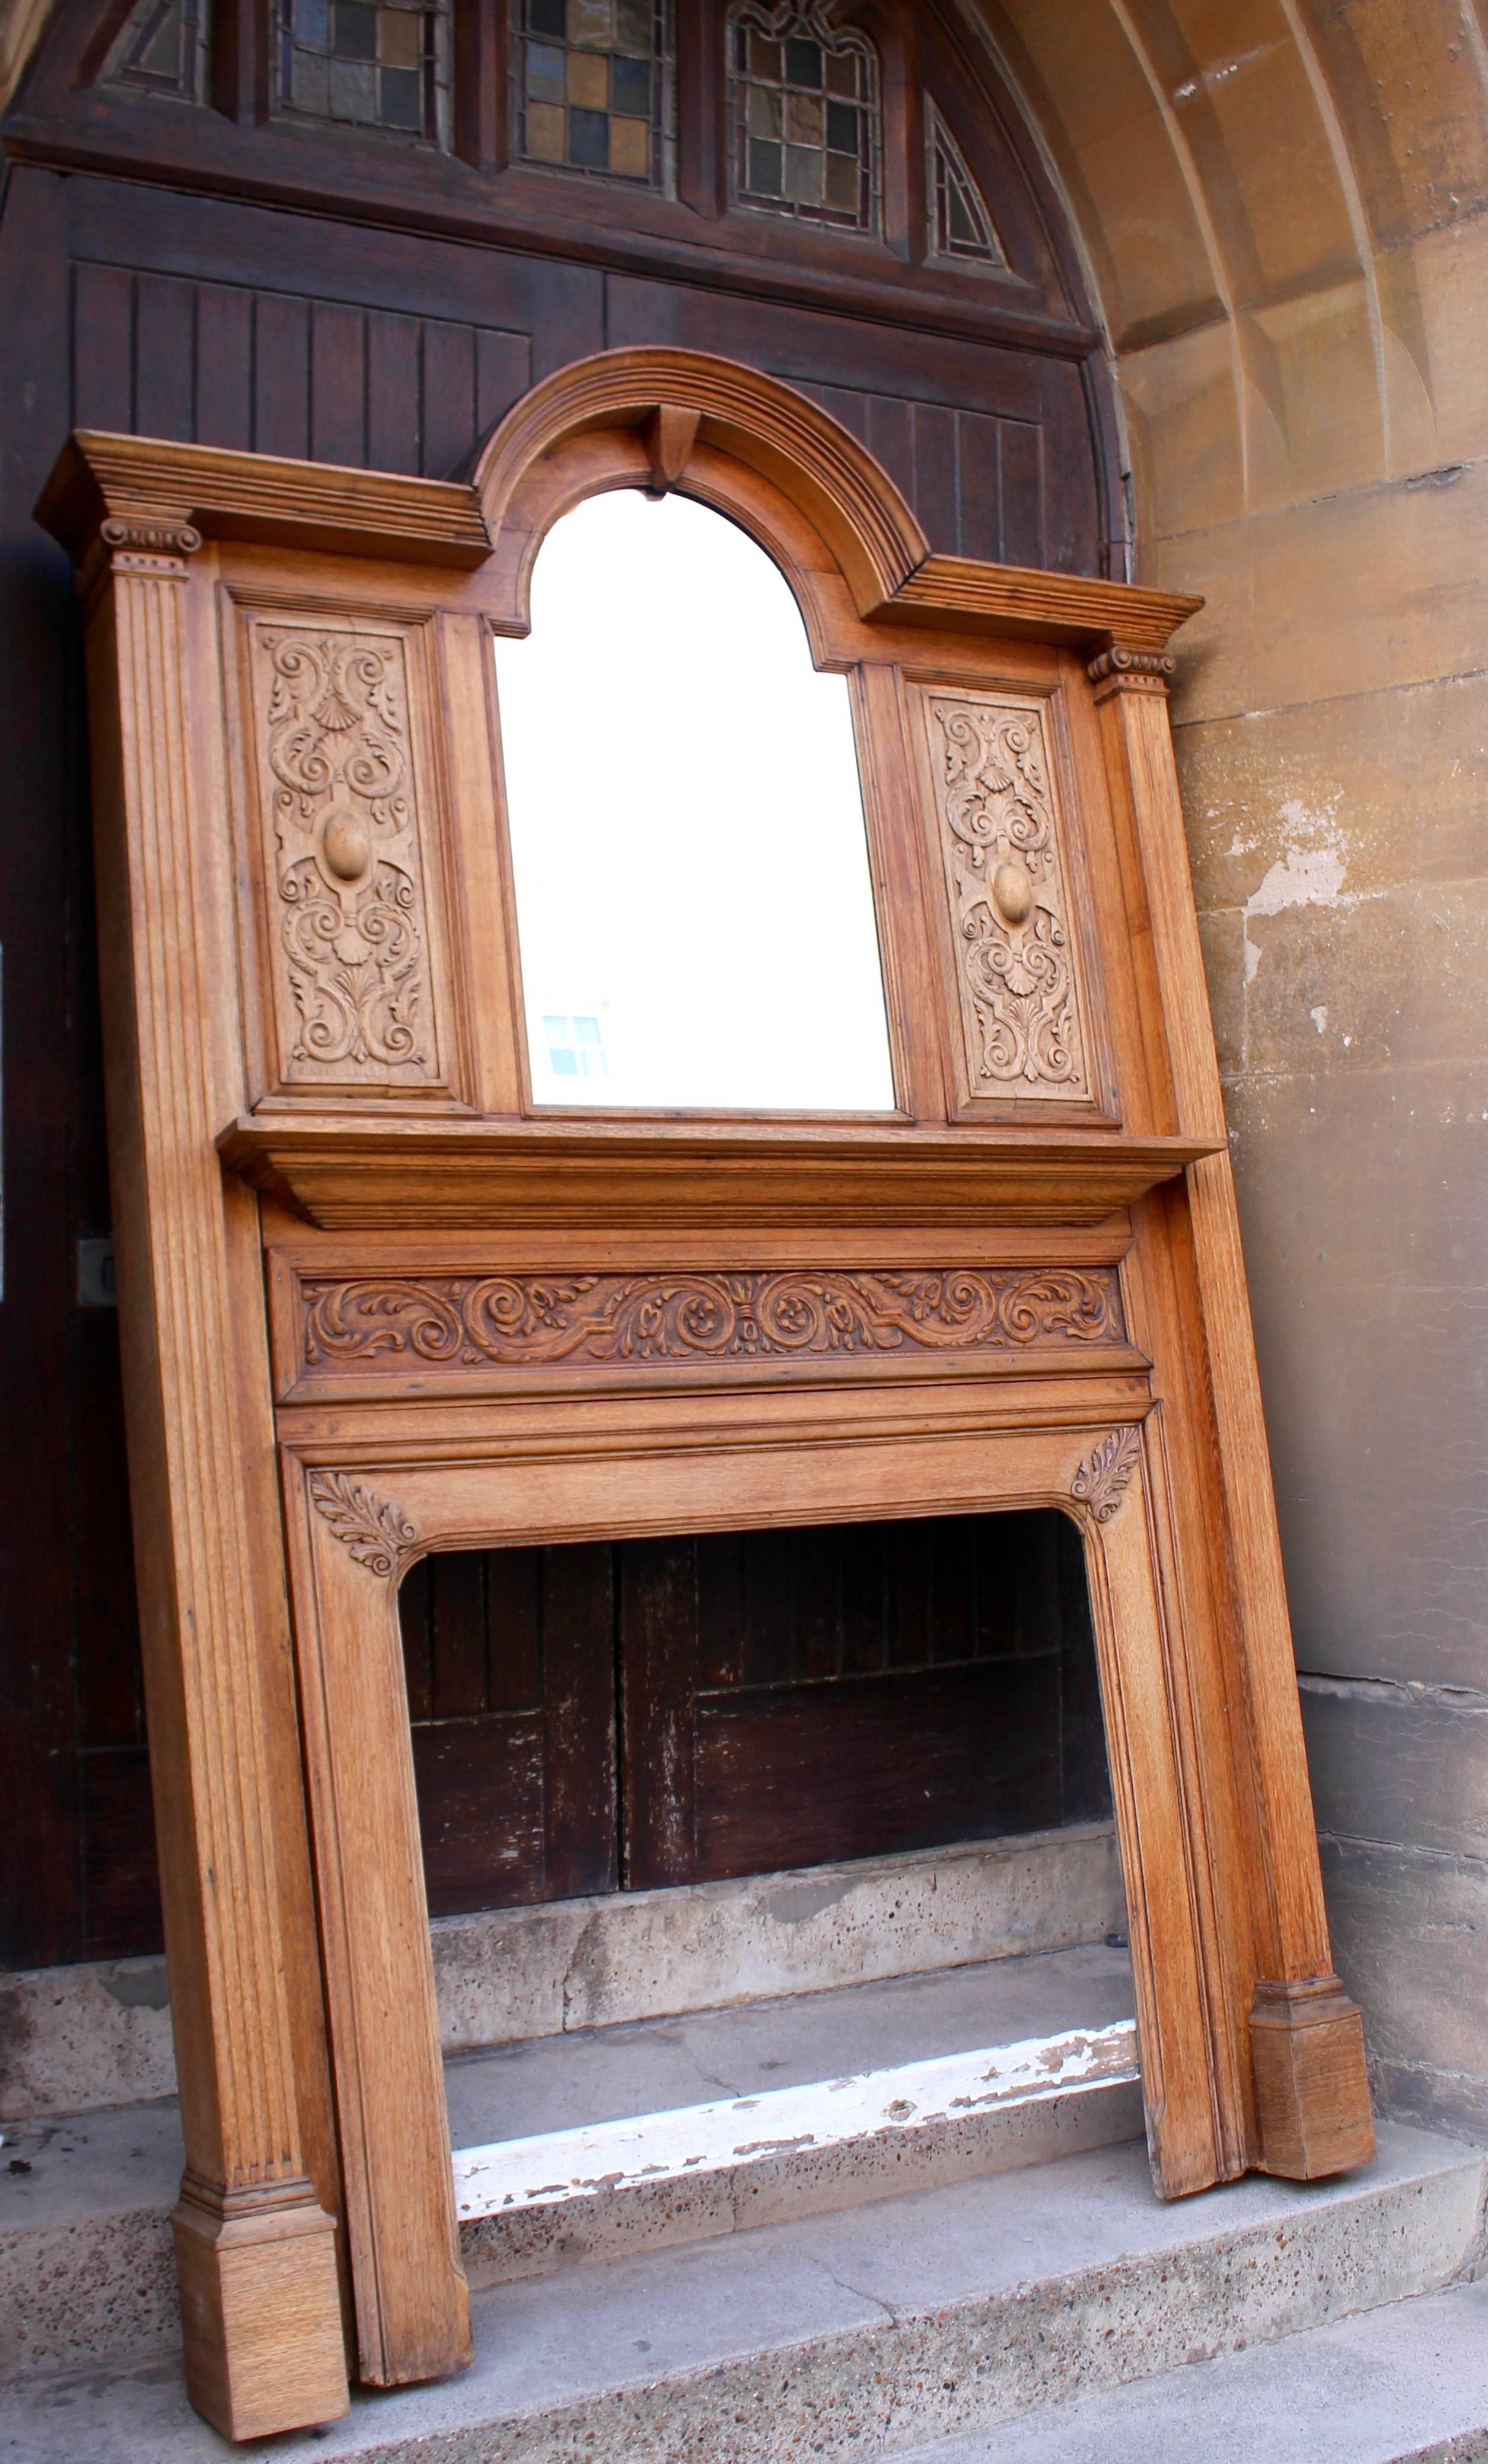 English Antique Carved Oak Fire Surround with Bevelled Mirror, circa 1900